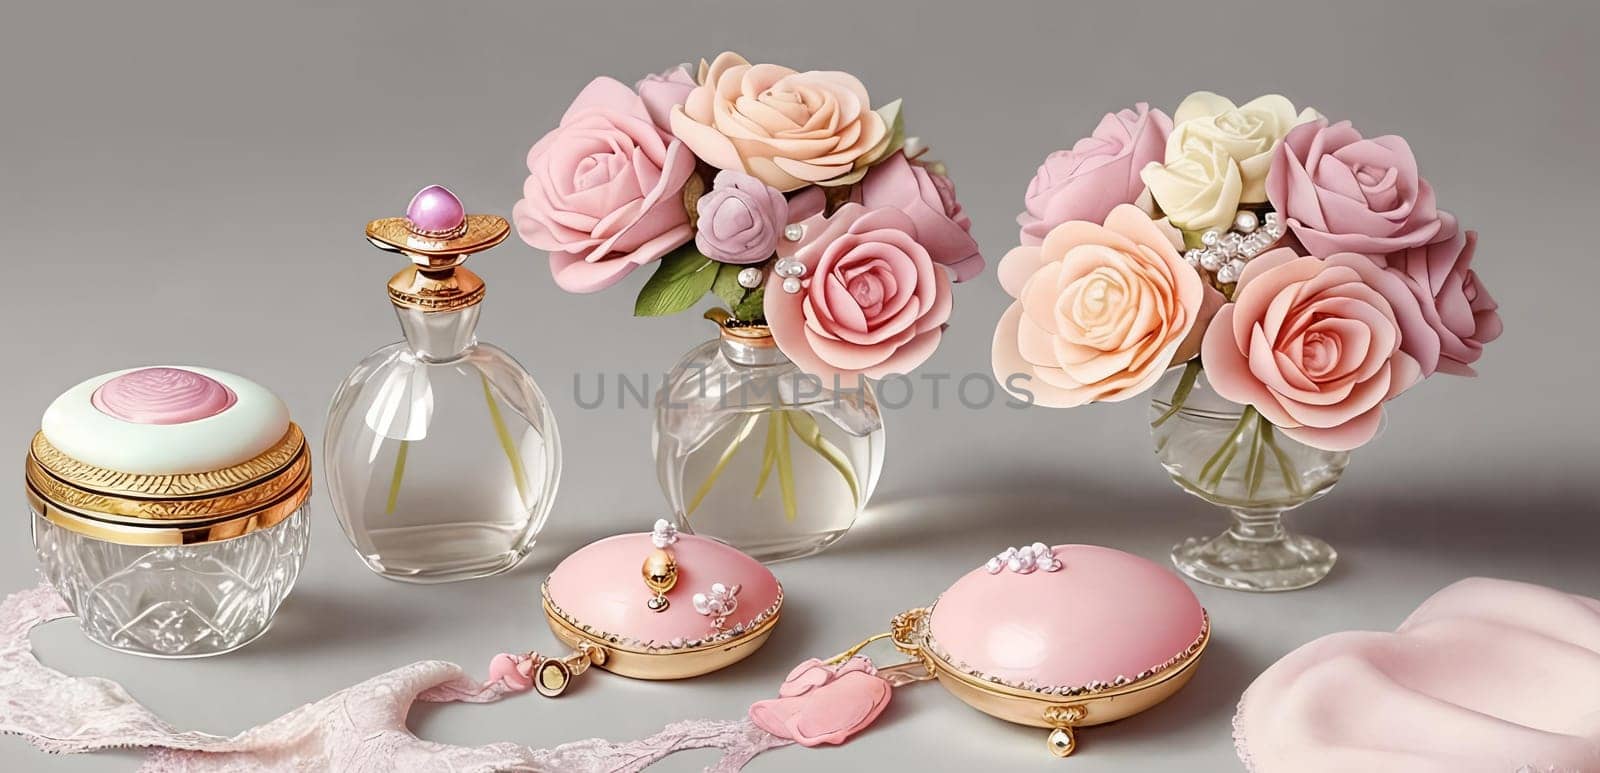 Pastel Palette. A still life scene featuring pastel-colored feminine accessories like a delicate pearl necklace, a lace handkerchief, and a vintage perfume bottle against a soft textured background for a sophisticated and timeless look.